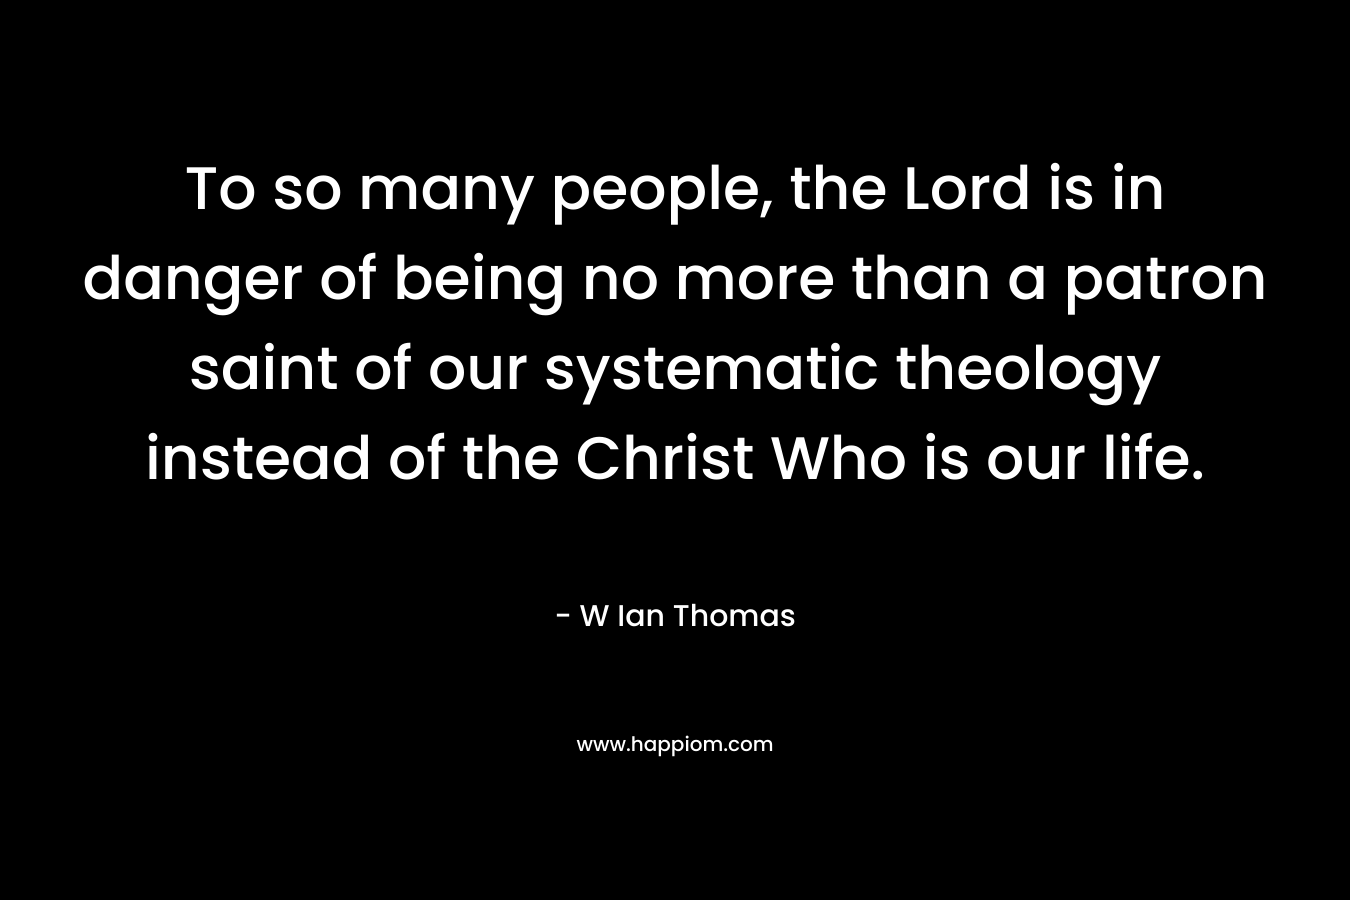 To so many people, the Lord is in danger of being no more than a patron saint of our systematic theology instead of the Christ Who is our life.